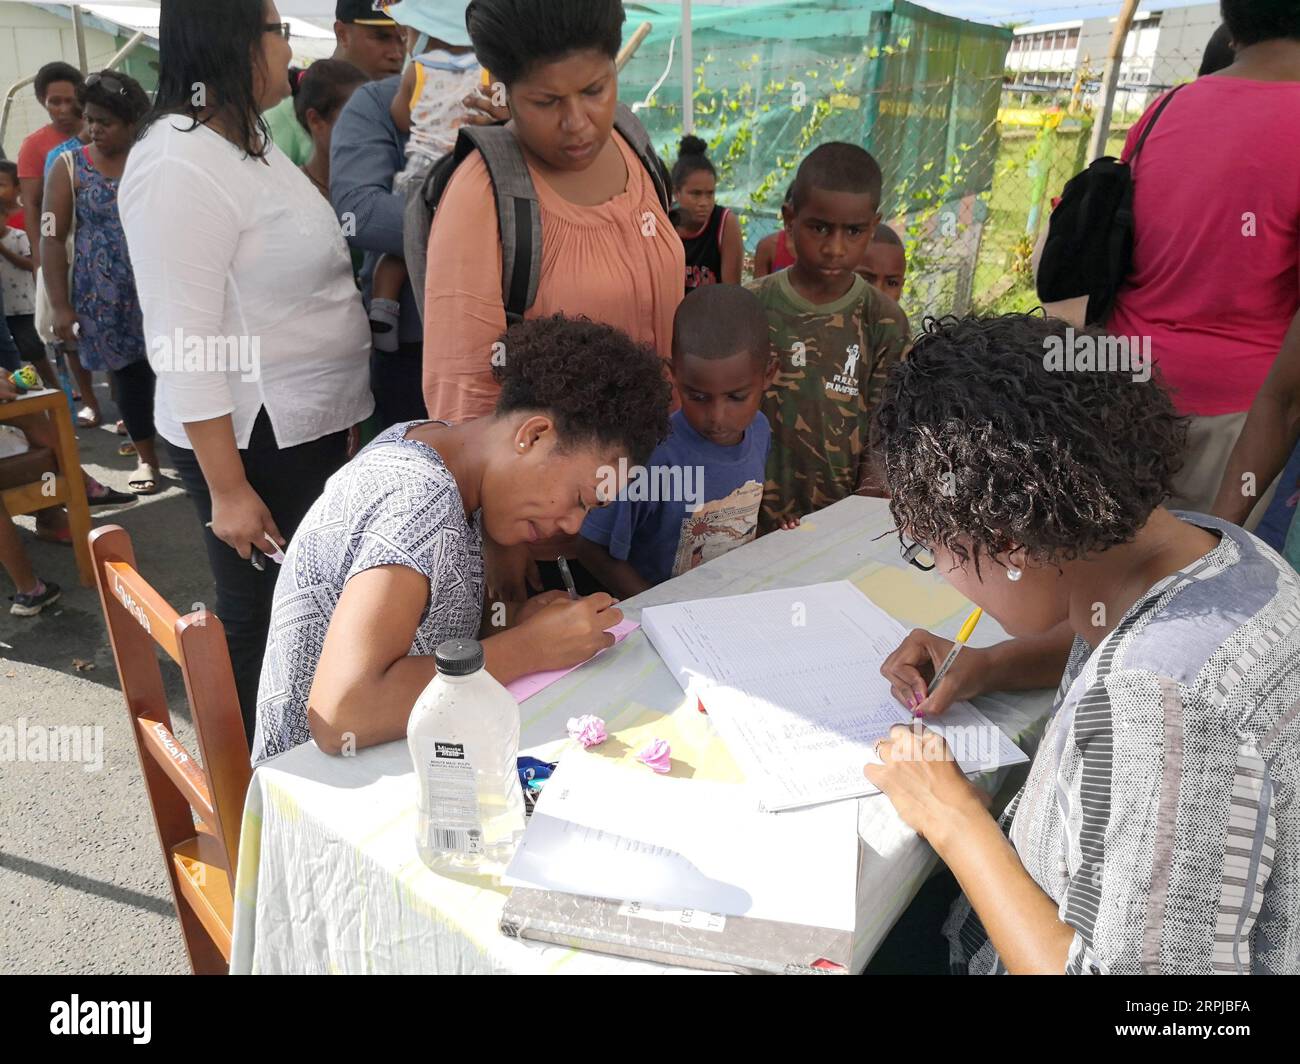 191204 -- SUVA, Dec. 4, 2019 -- Residents register before receiving measles vaccine in Suva, Fiji, Dec. 4, 2019. The second phase of the measles immunization campaign began on Wednesday in Fiji s capital Suva. The immunization campaign targets children who have not received two doses of the measles vaccine, any child aged 12 and 18 months who is due for immunization, people travelling overseas, healthcare workers, and airport and hotel staff around the country. There are 15 confirmed measles cases in Fiji by Tuesday.  FIJI-SUVA-MEASLES IMMUNIZATION ZhangxYongxing PUBLICATIONxNOTxINxCHN Stock Photo